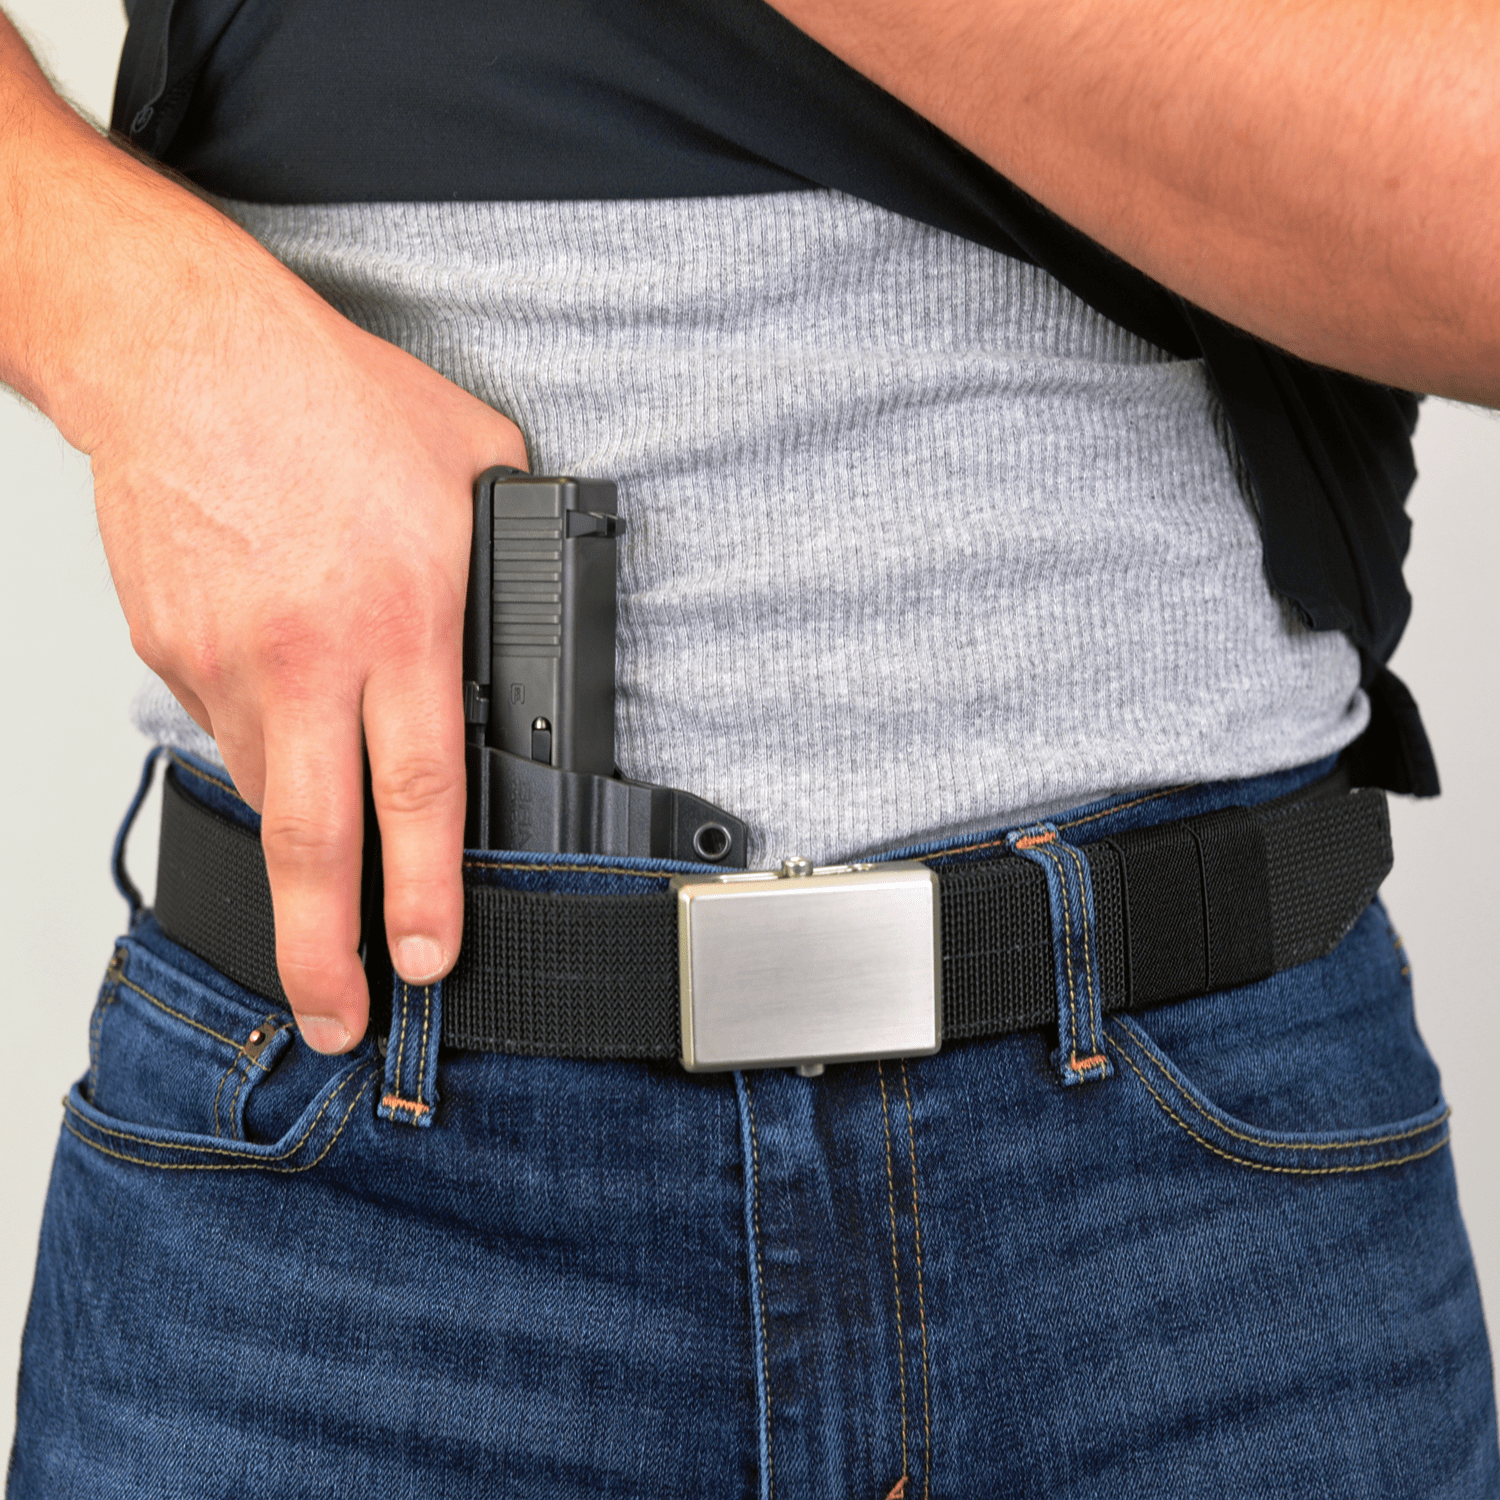 IWB Holsters for Concealed Carry